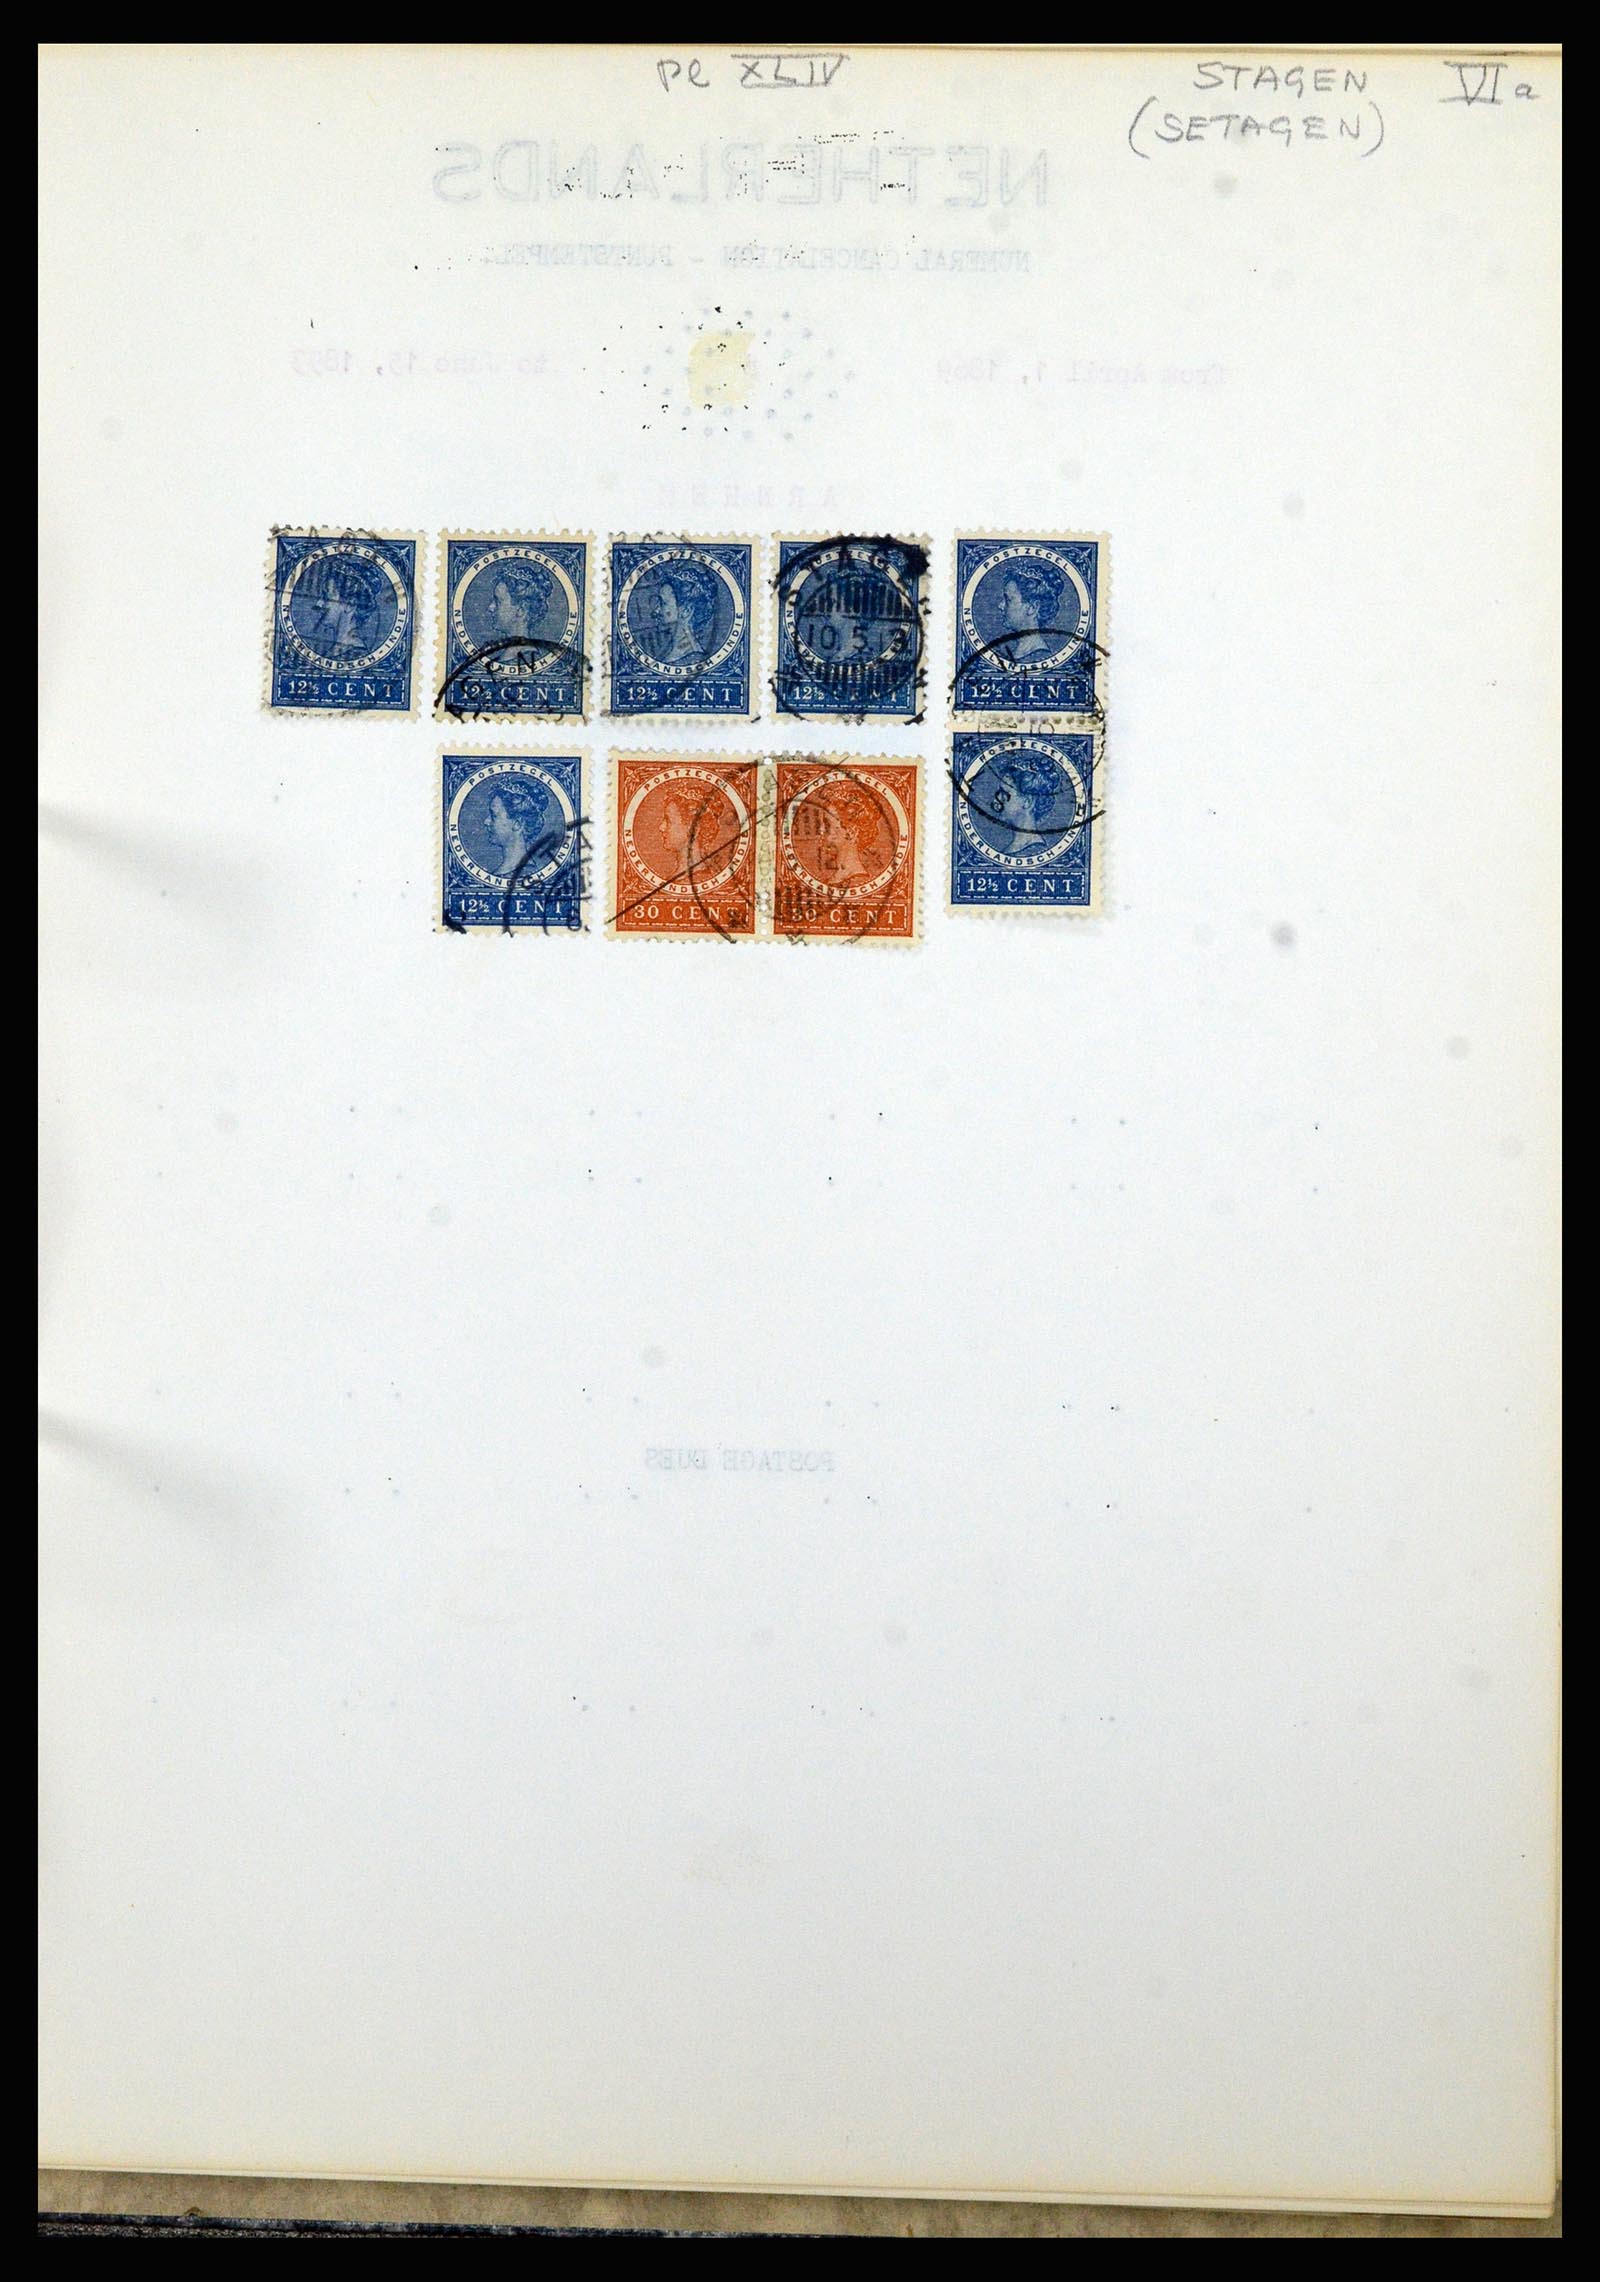 36841 144 - Stamp collection 36841 Dutch east Indies short bar cancels.